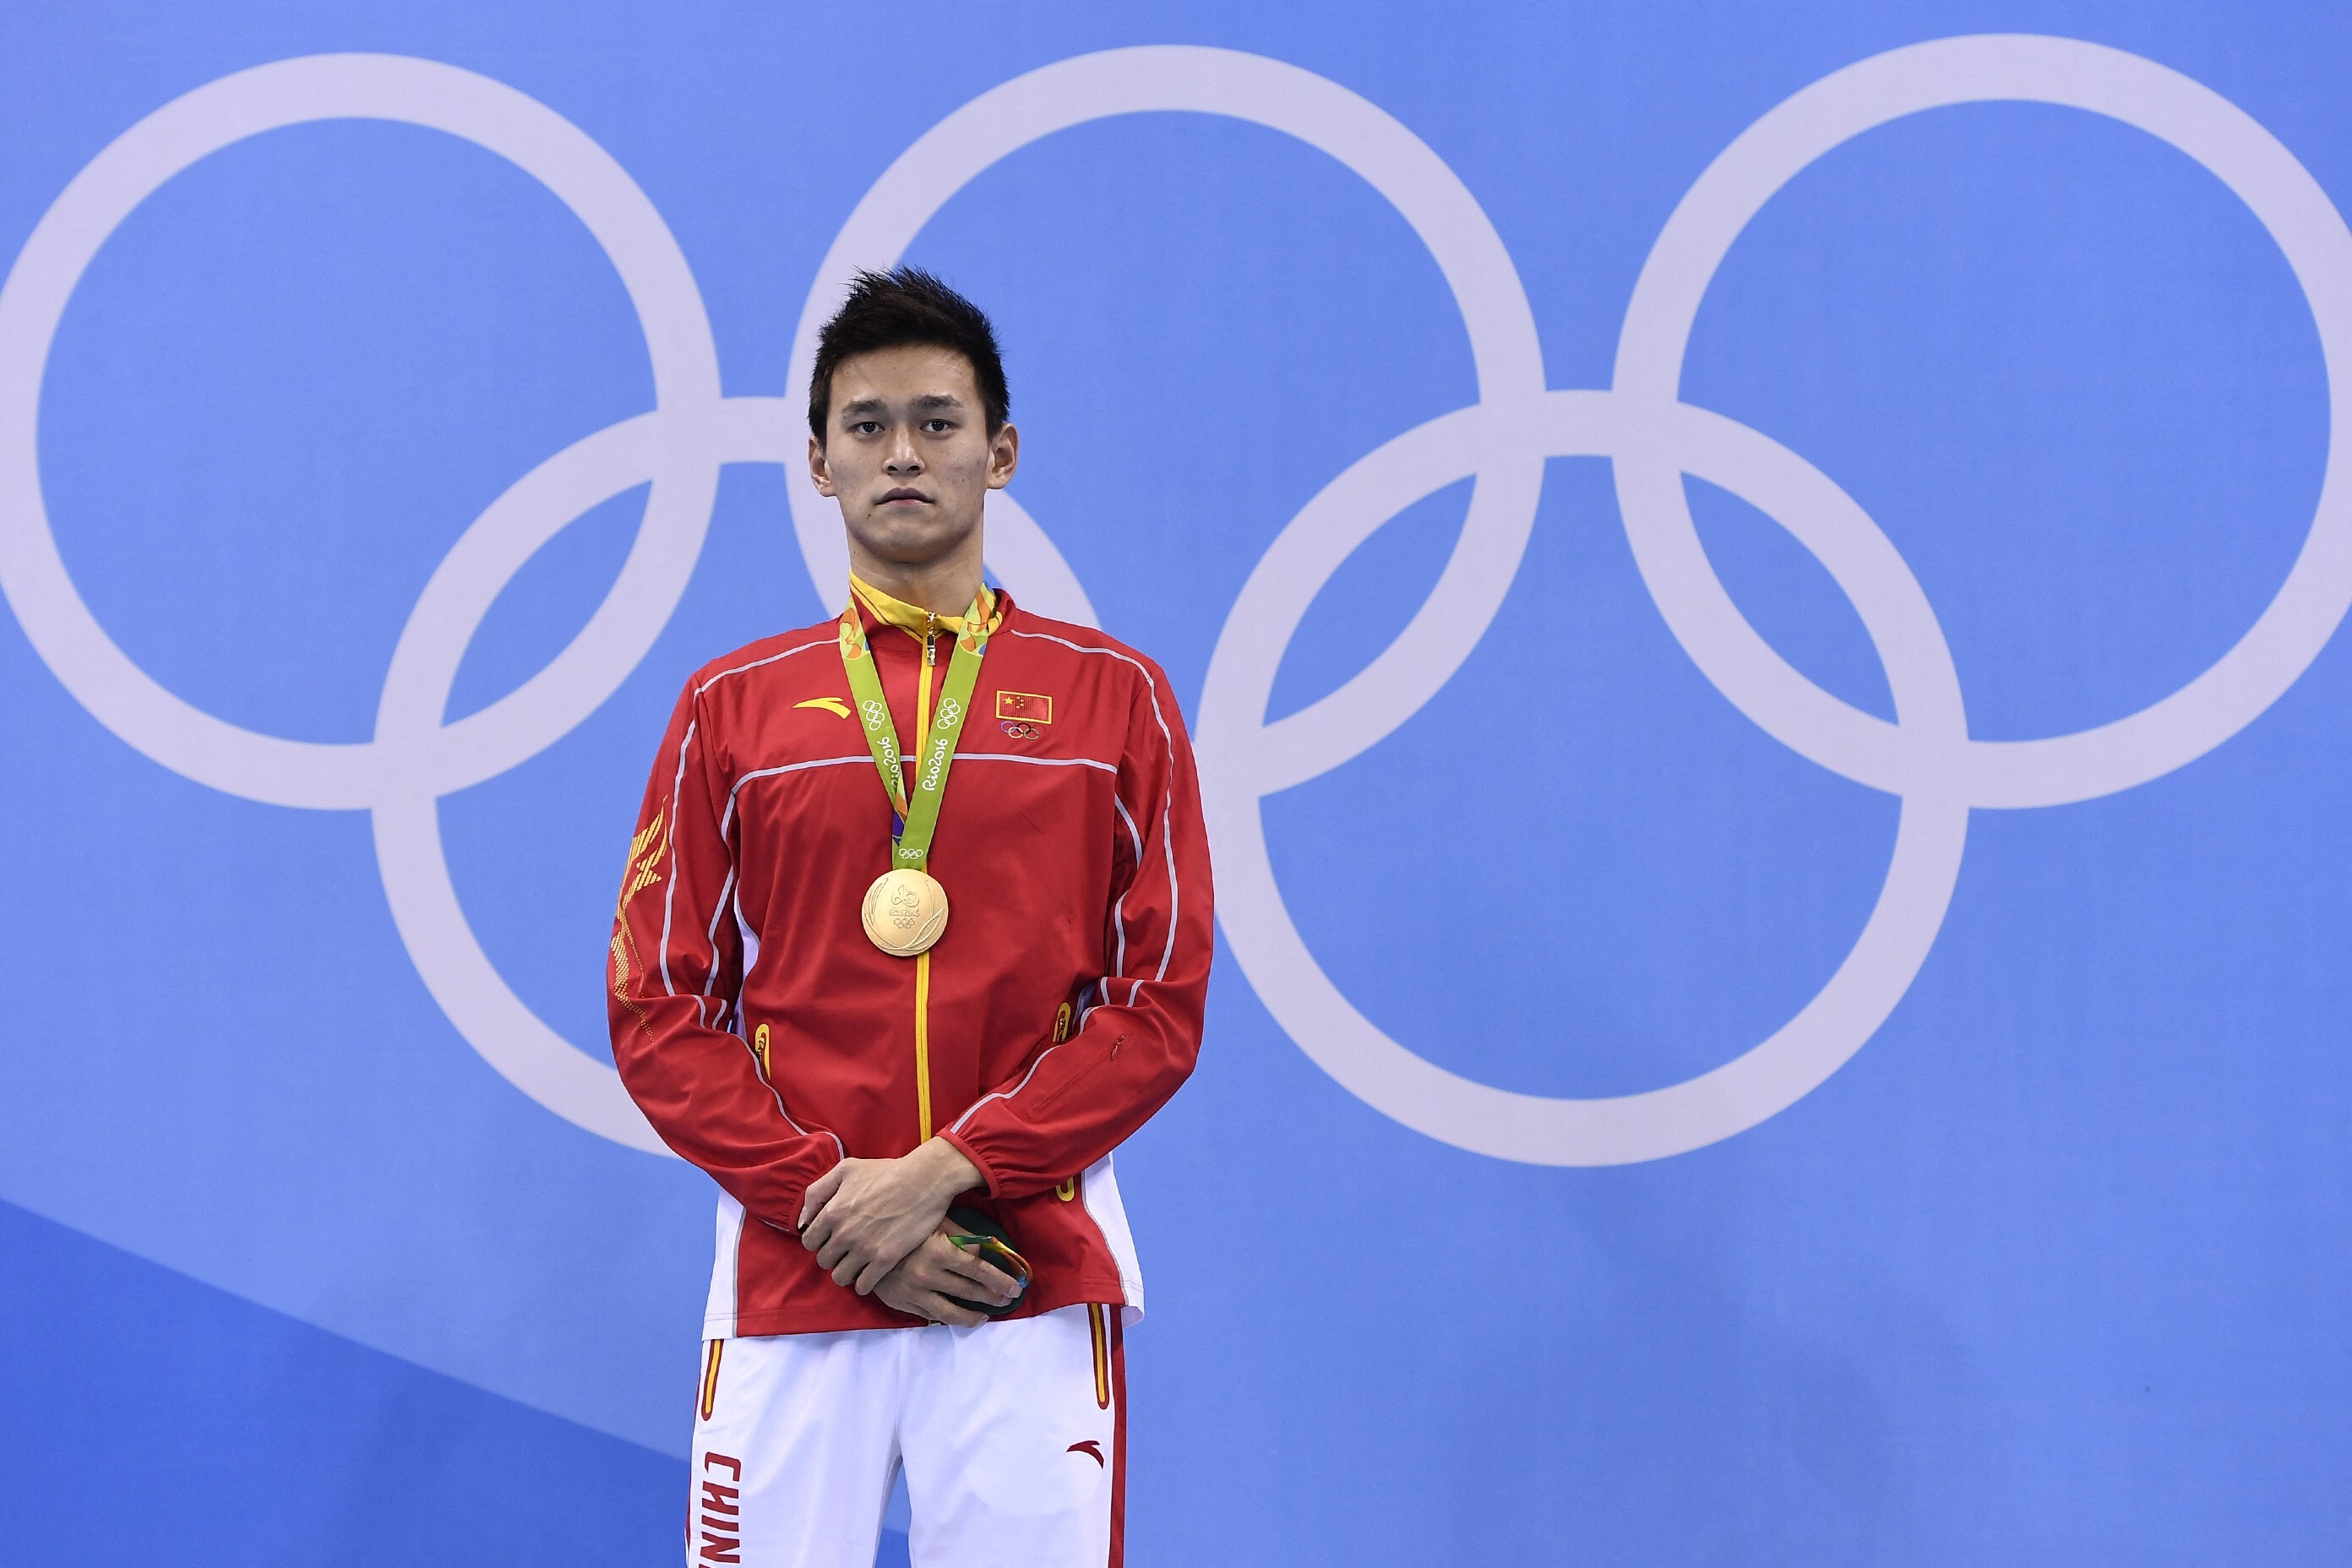 China's Sun Yang poses with his gold medal on the podium after he won the men's 200m freestyle final at the Rio 2016 Olympic Games. Photo: AFP